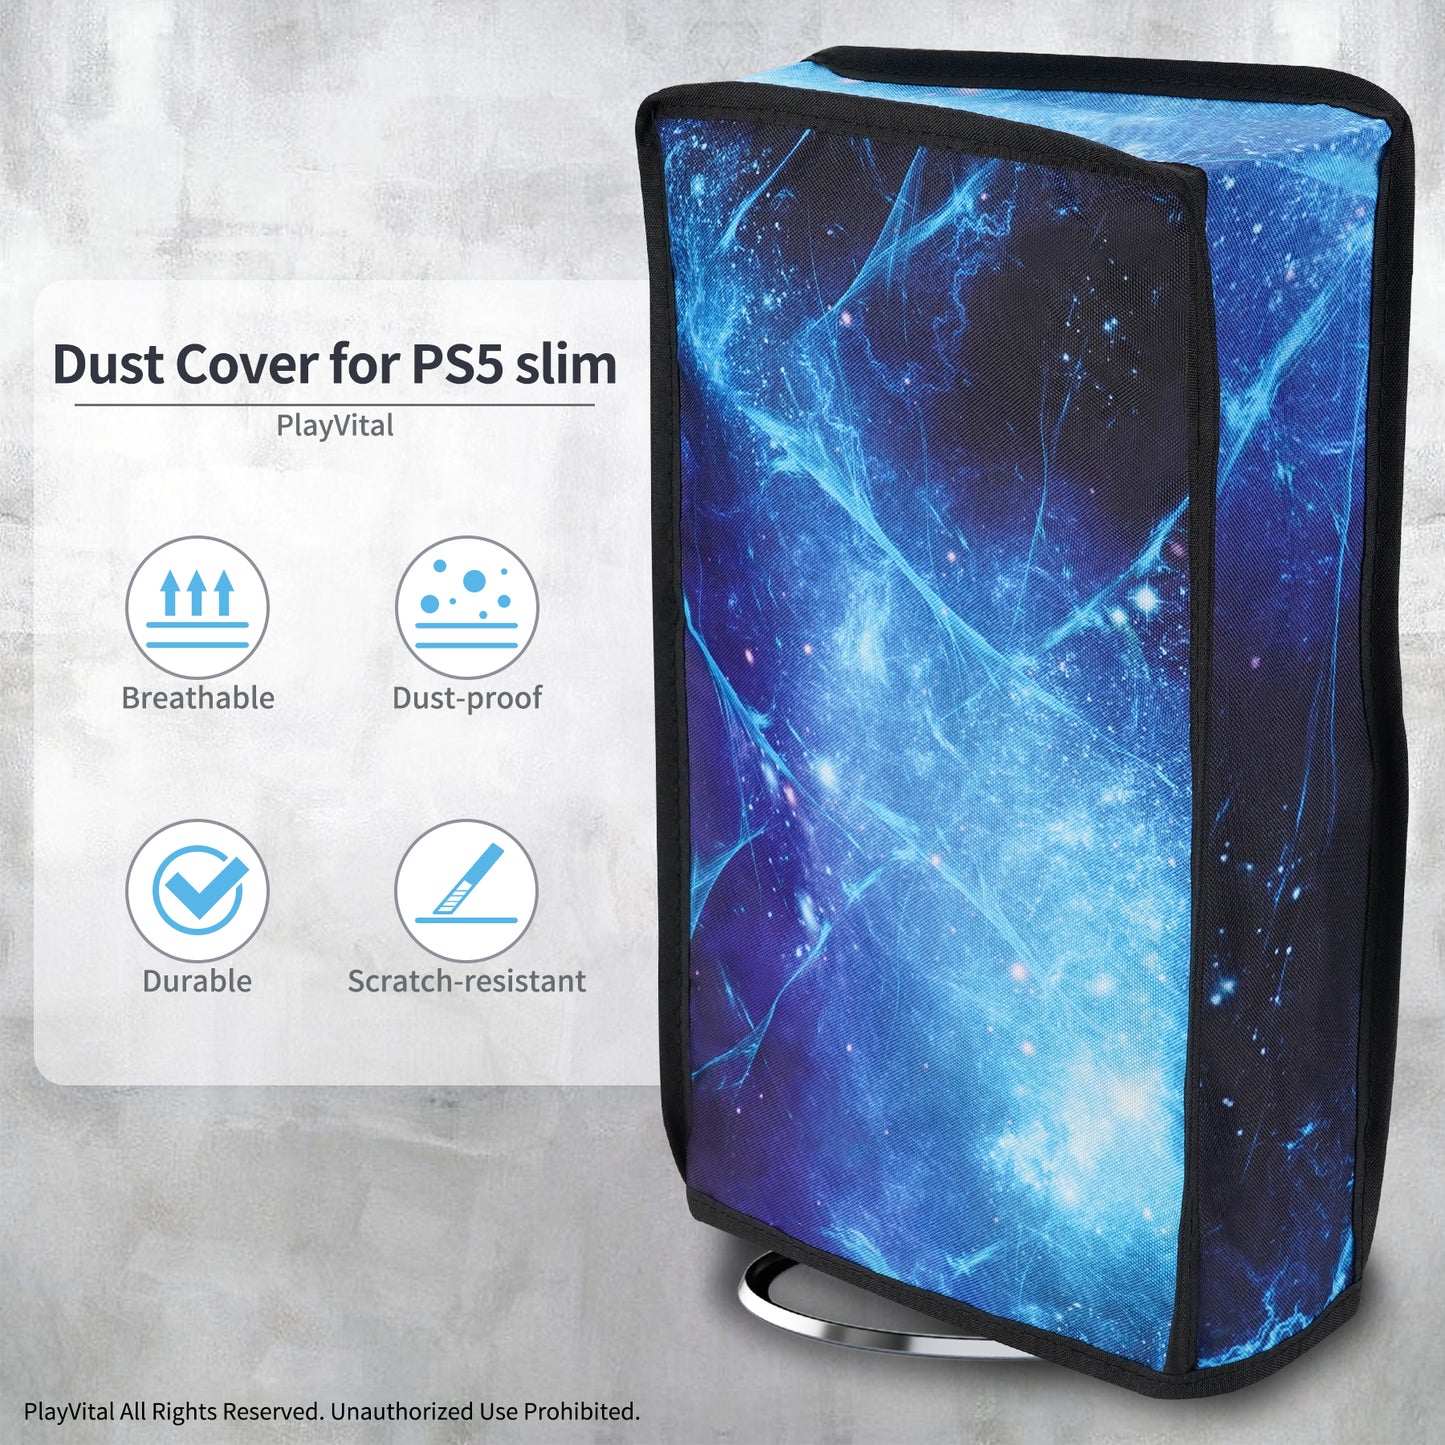 PlayVital Vertical Dust Cover for ps5 Slim Disc Edition(The New Smaller Design), Nylon Dust Proof Protector Waterproof Cover Sleeve for ps5 Slim Console - Blue Nebula - BMYPFH004 PlayVital